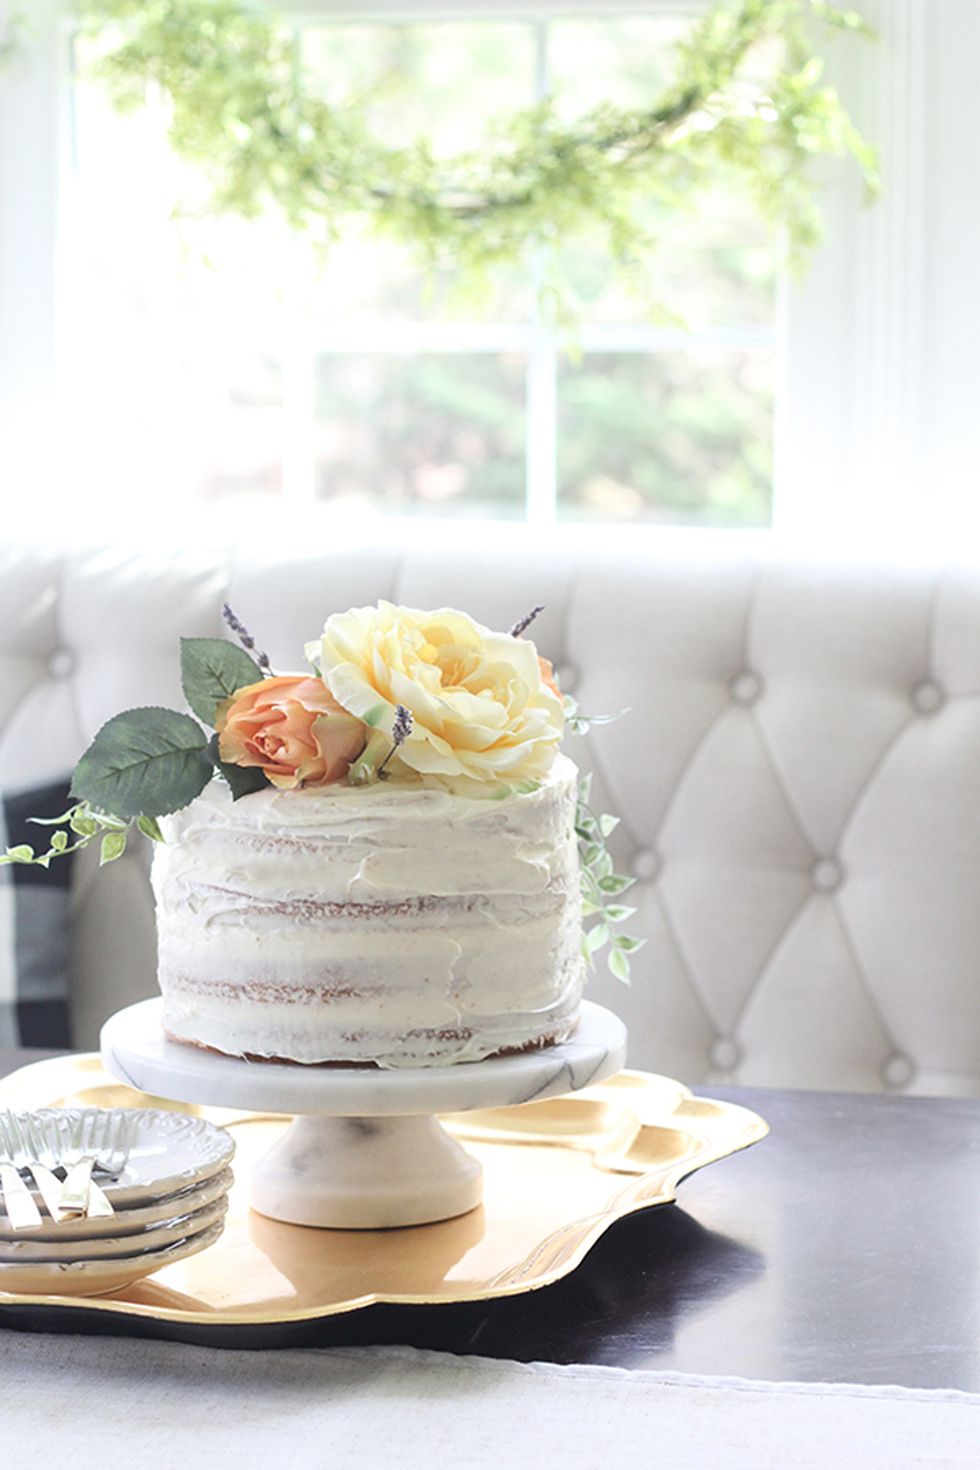 How to Make a Wedding Cake - Your Cup of Cake